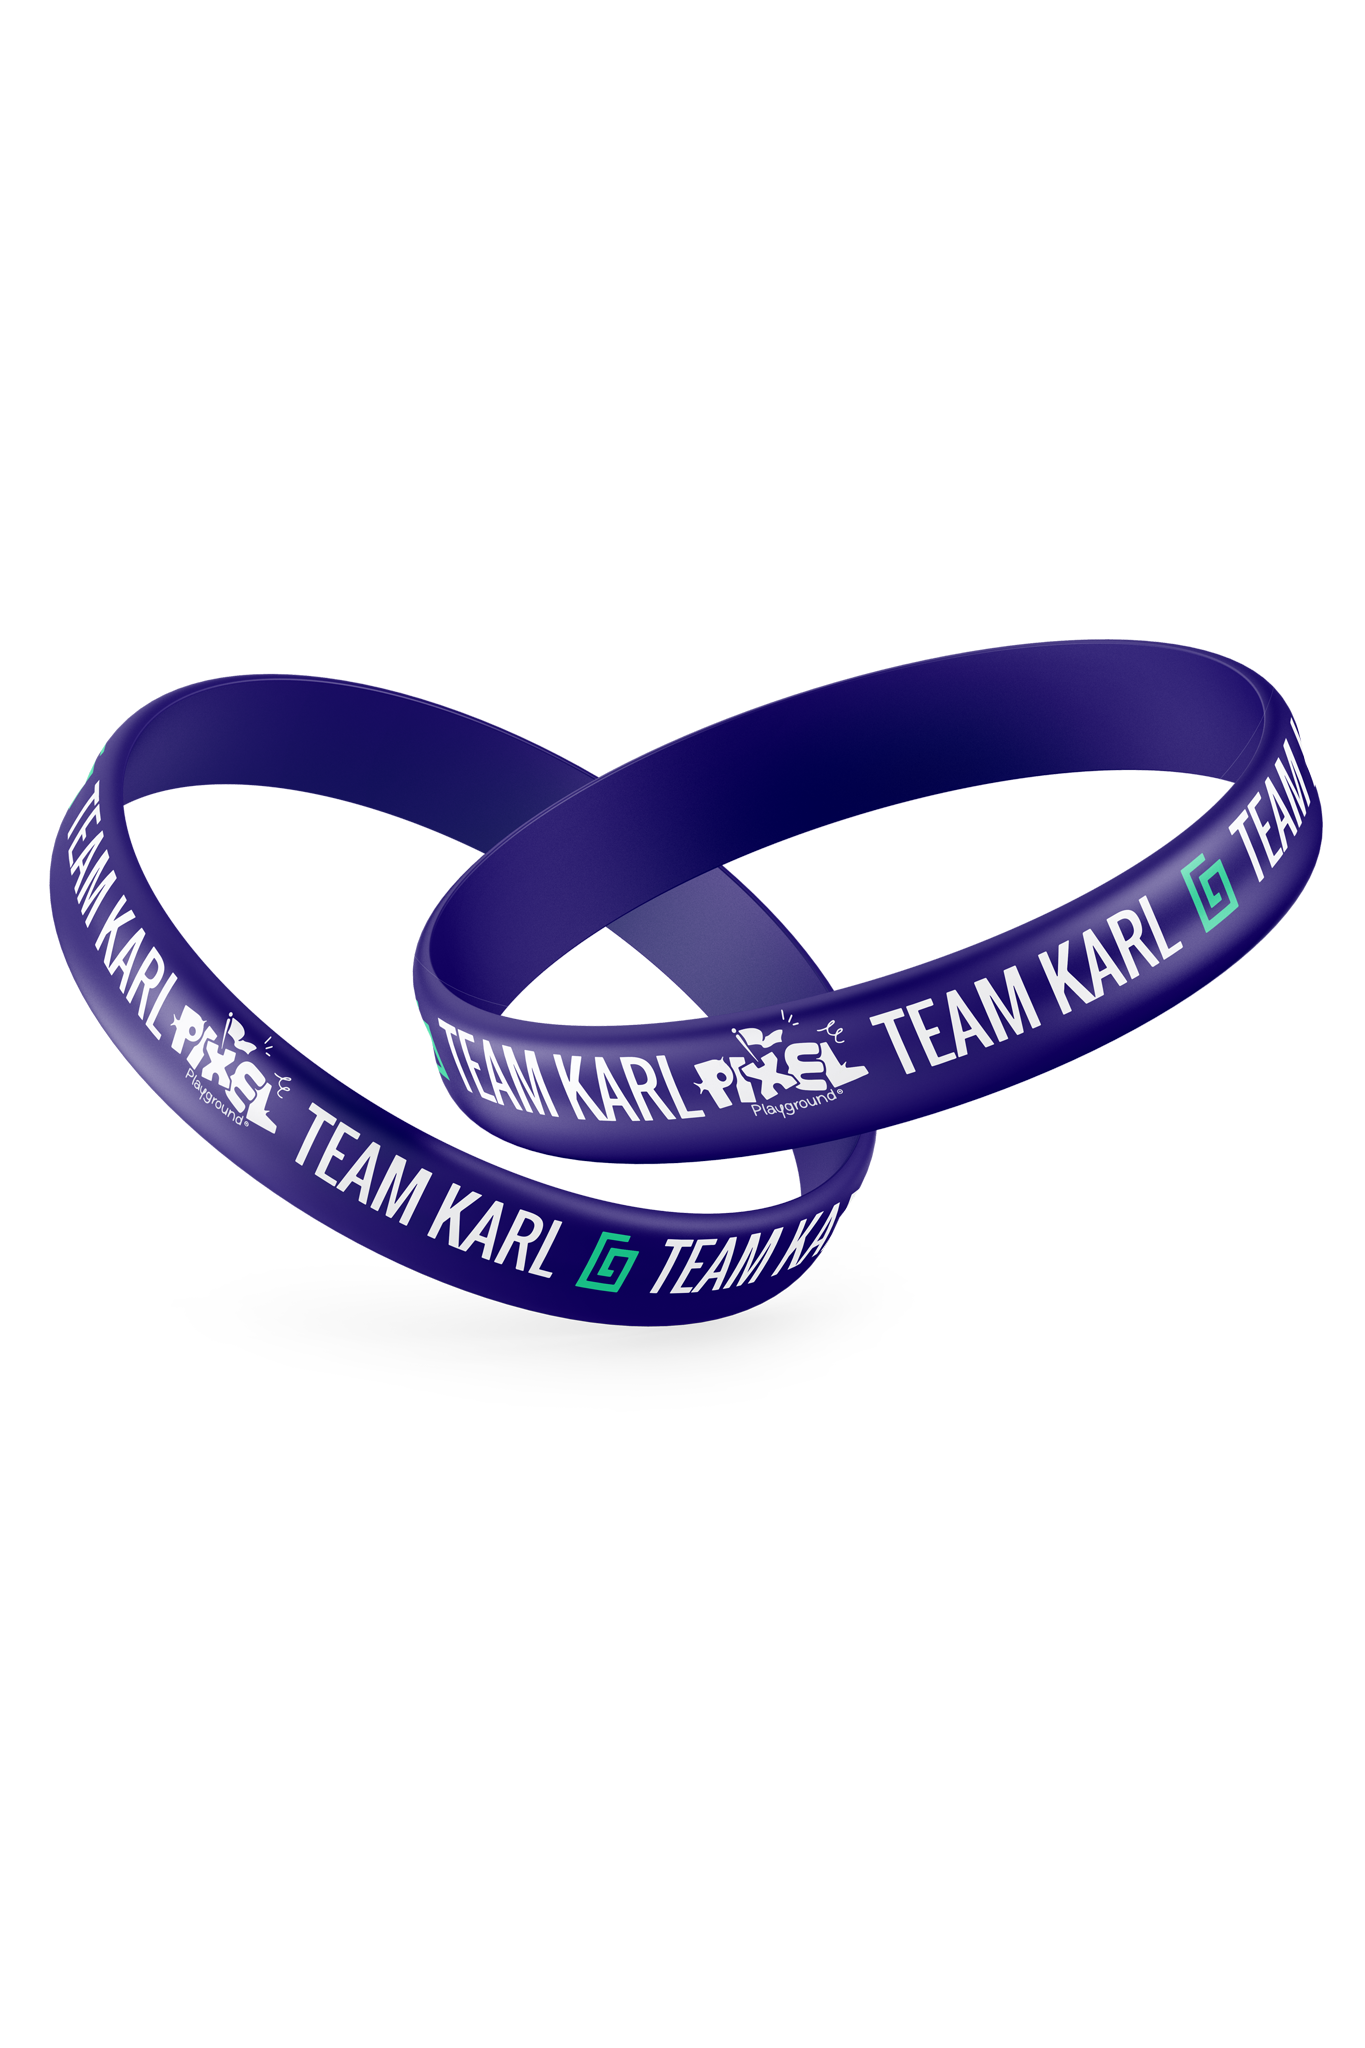 Purple wristband with 'TEAM KARL' text and Pixel Playground logo.